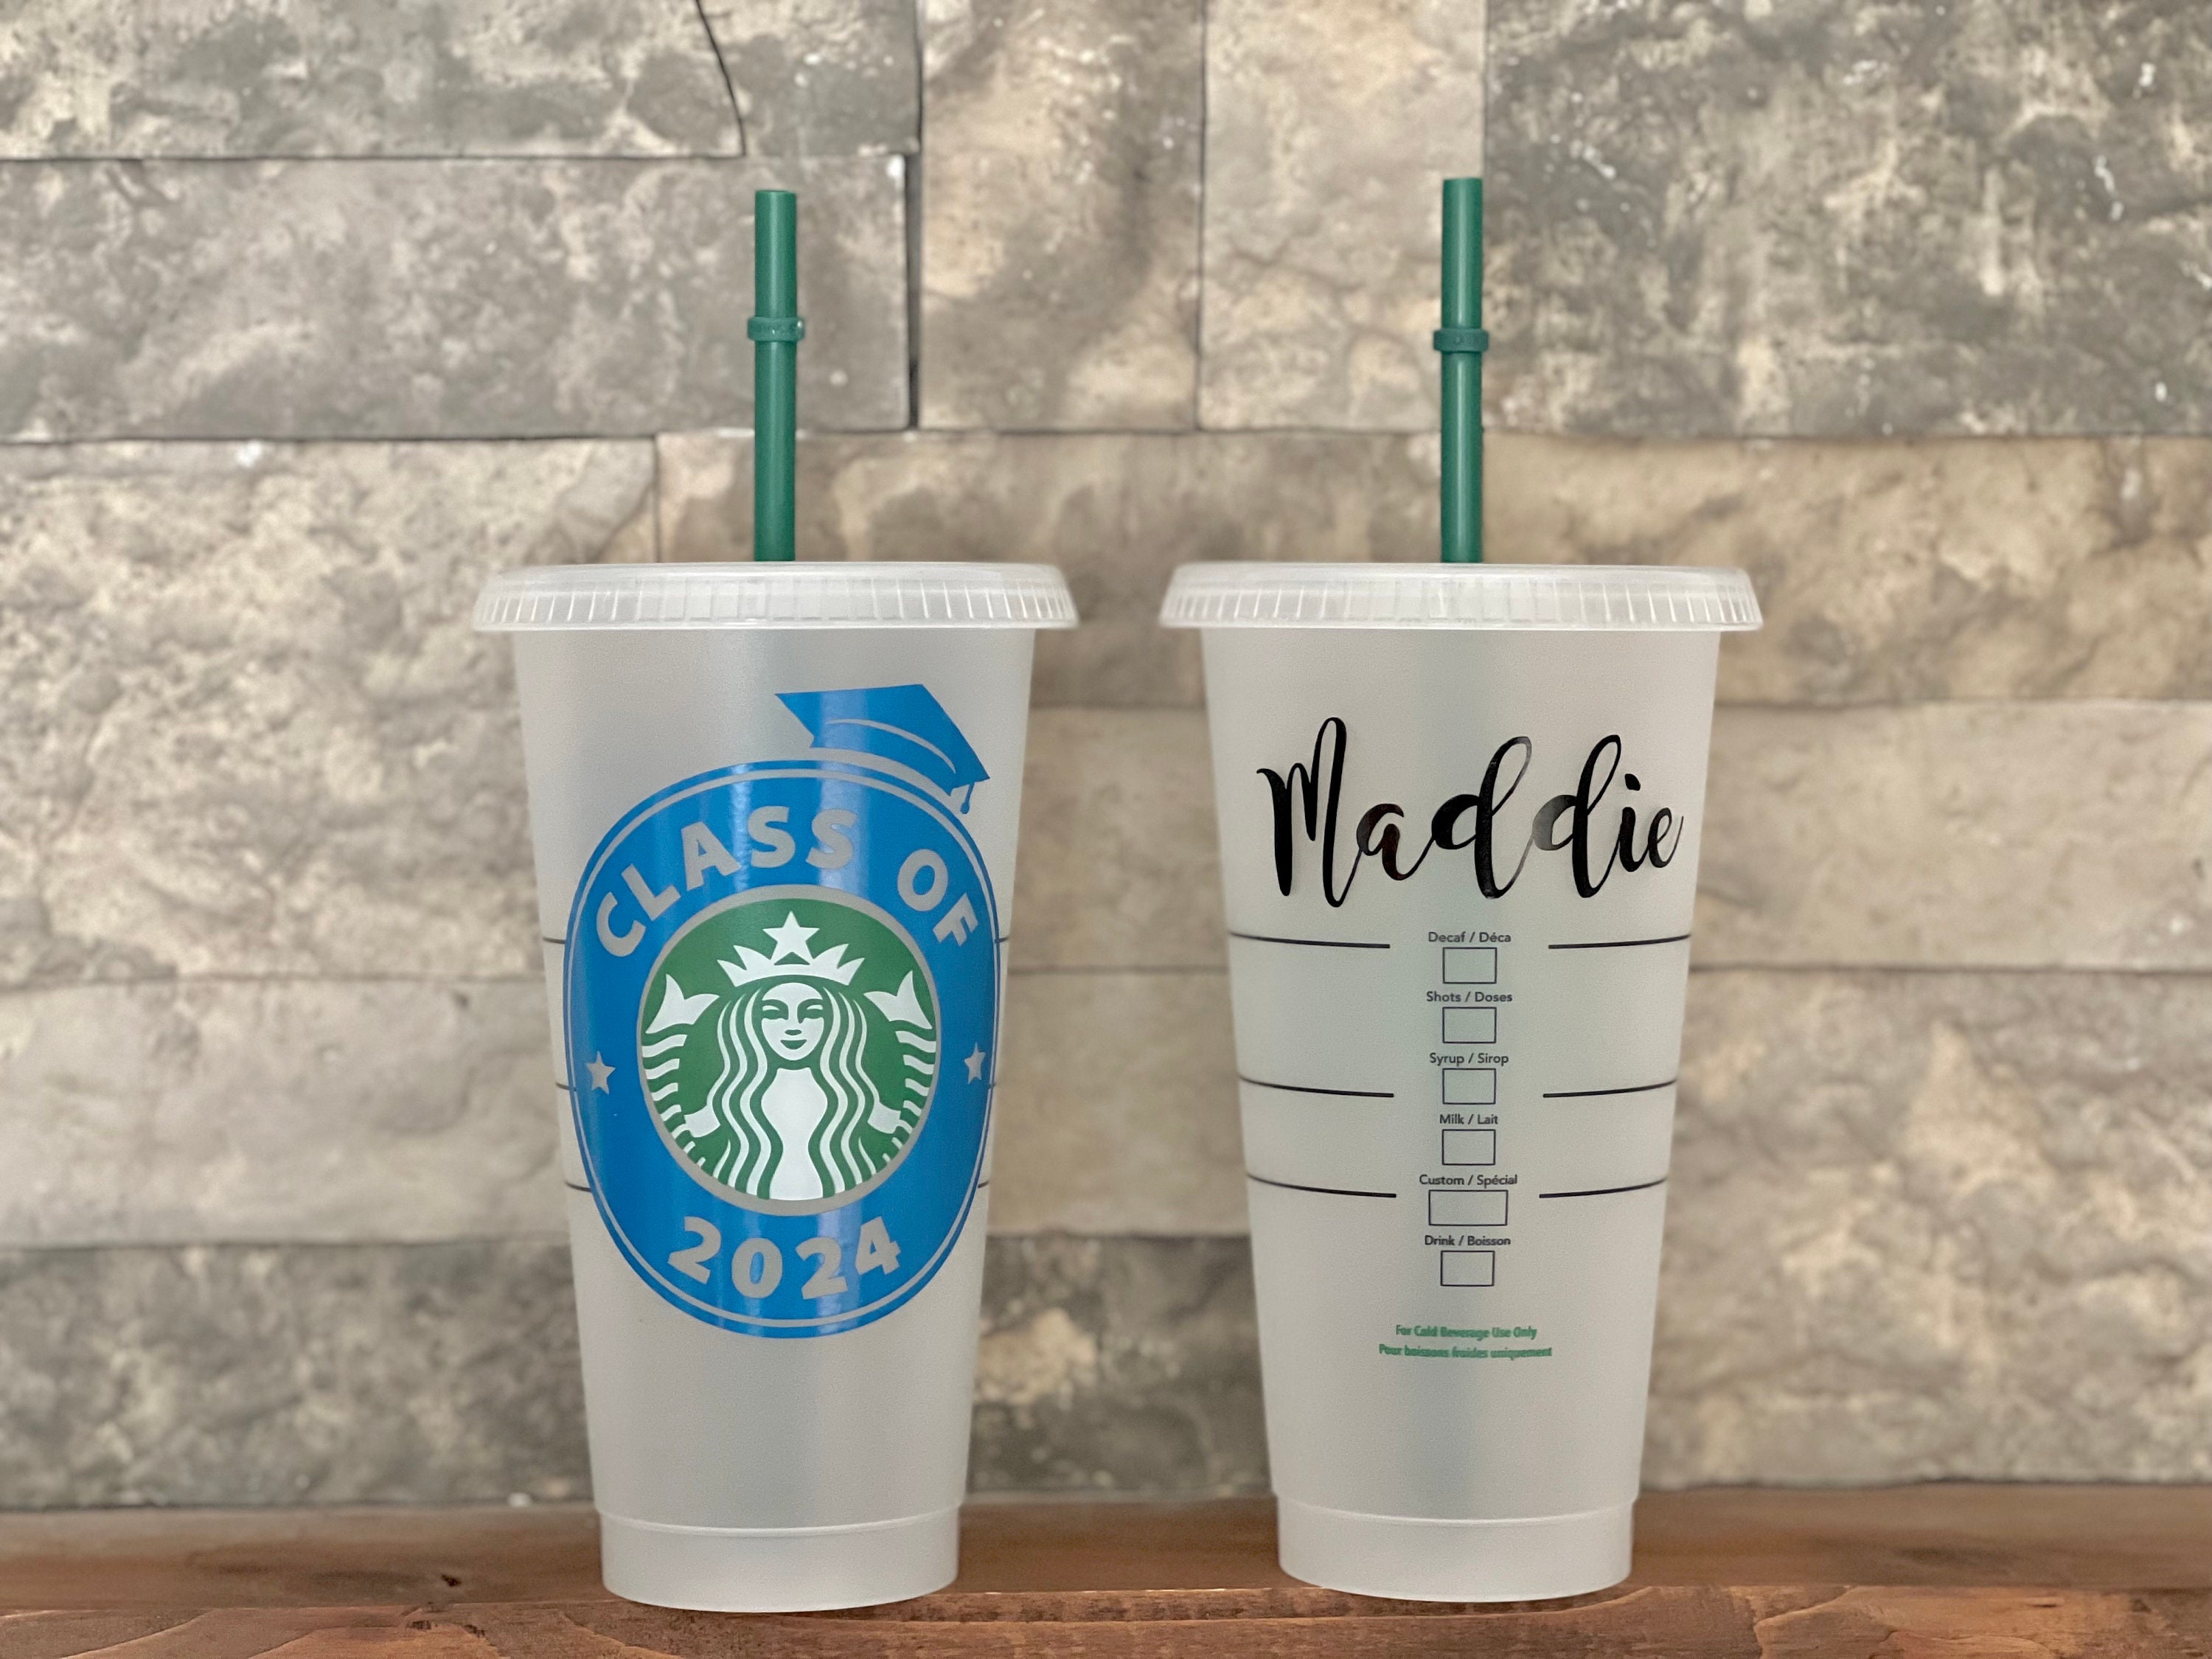 New Starbucks Holiday Cups Revealed for 2024 - May Sell Out!